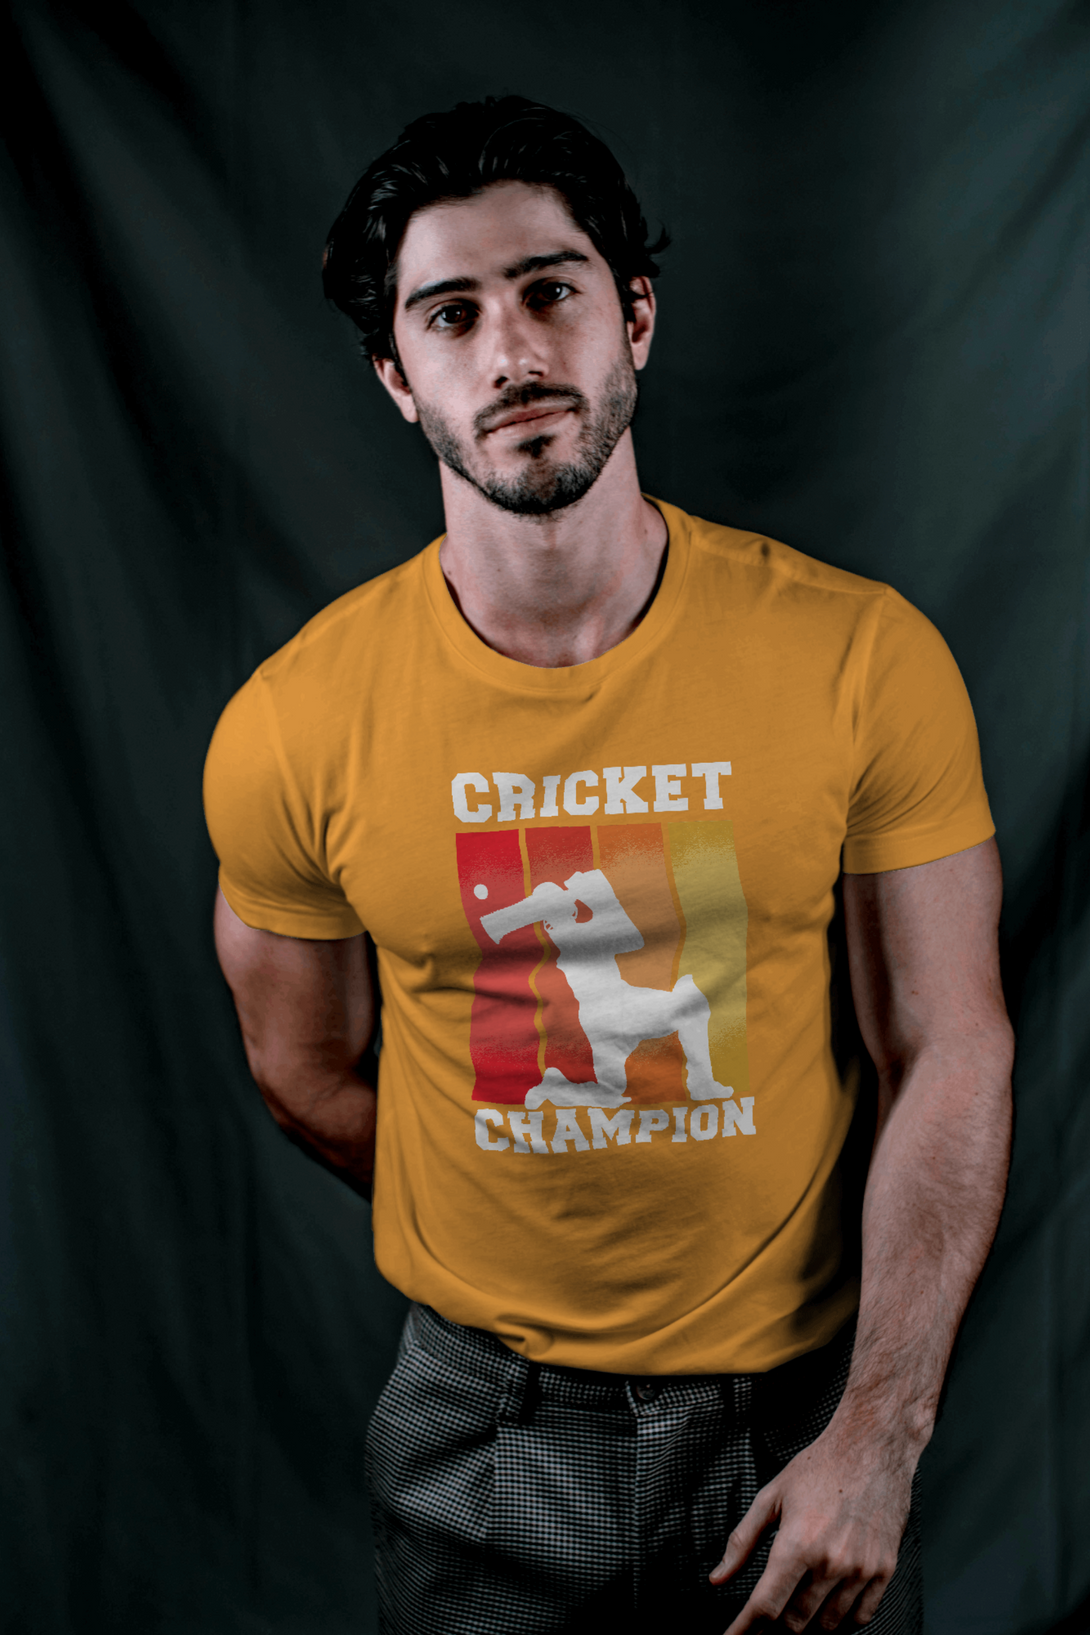 Cricket Champion Printed T-Shirt For Men - WowWaves - 3